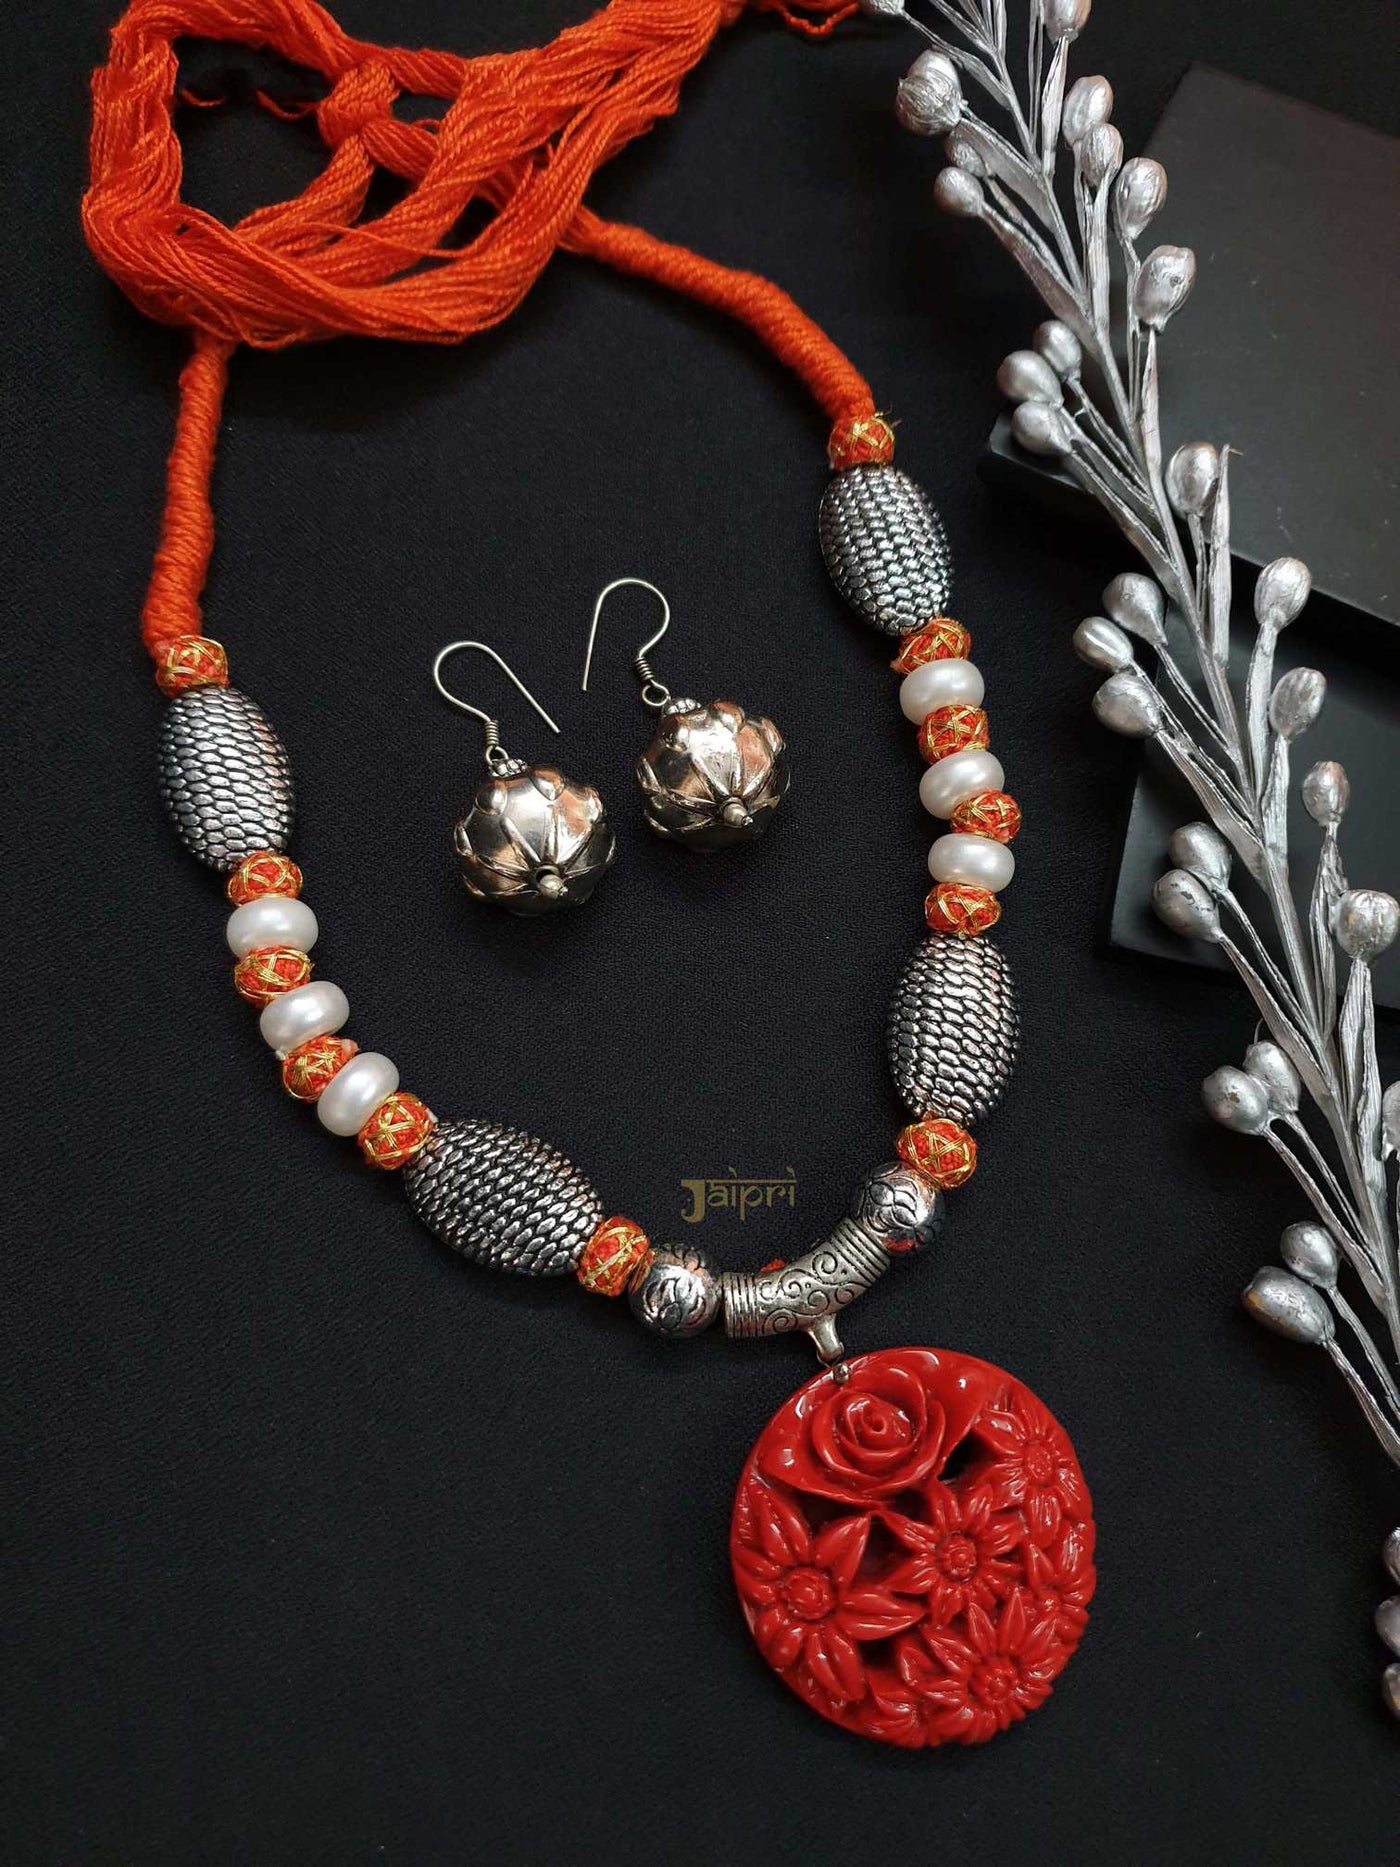 Floral Design, Red Stone Oxidized Necklace With Earrings